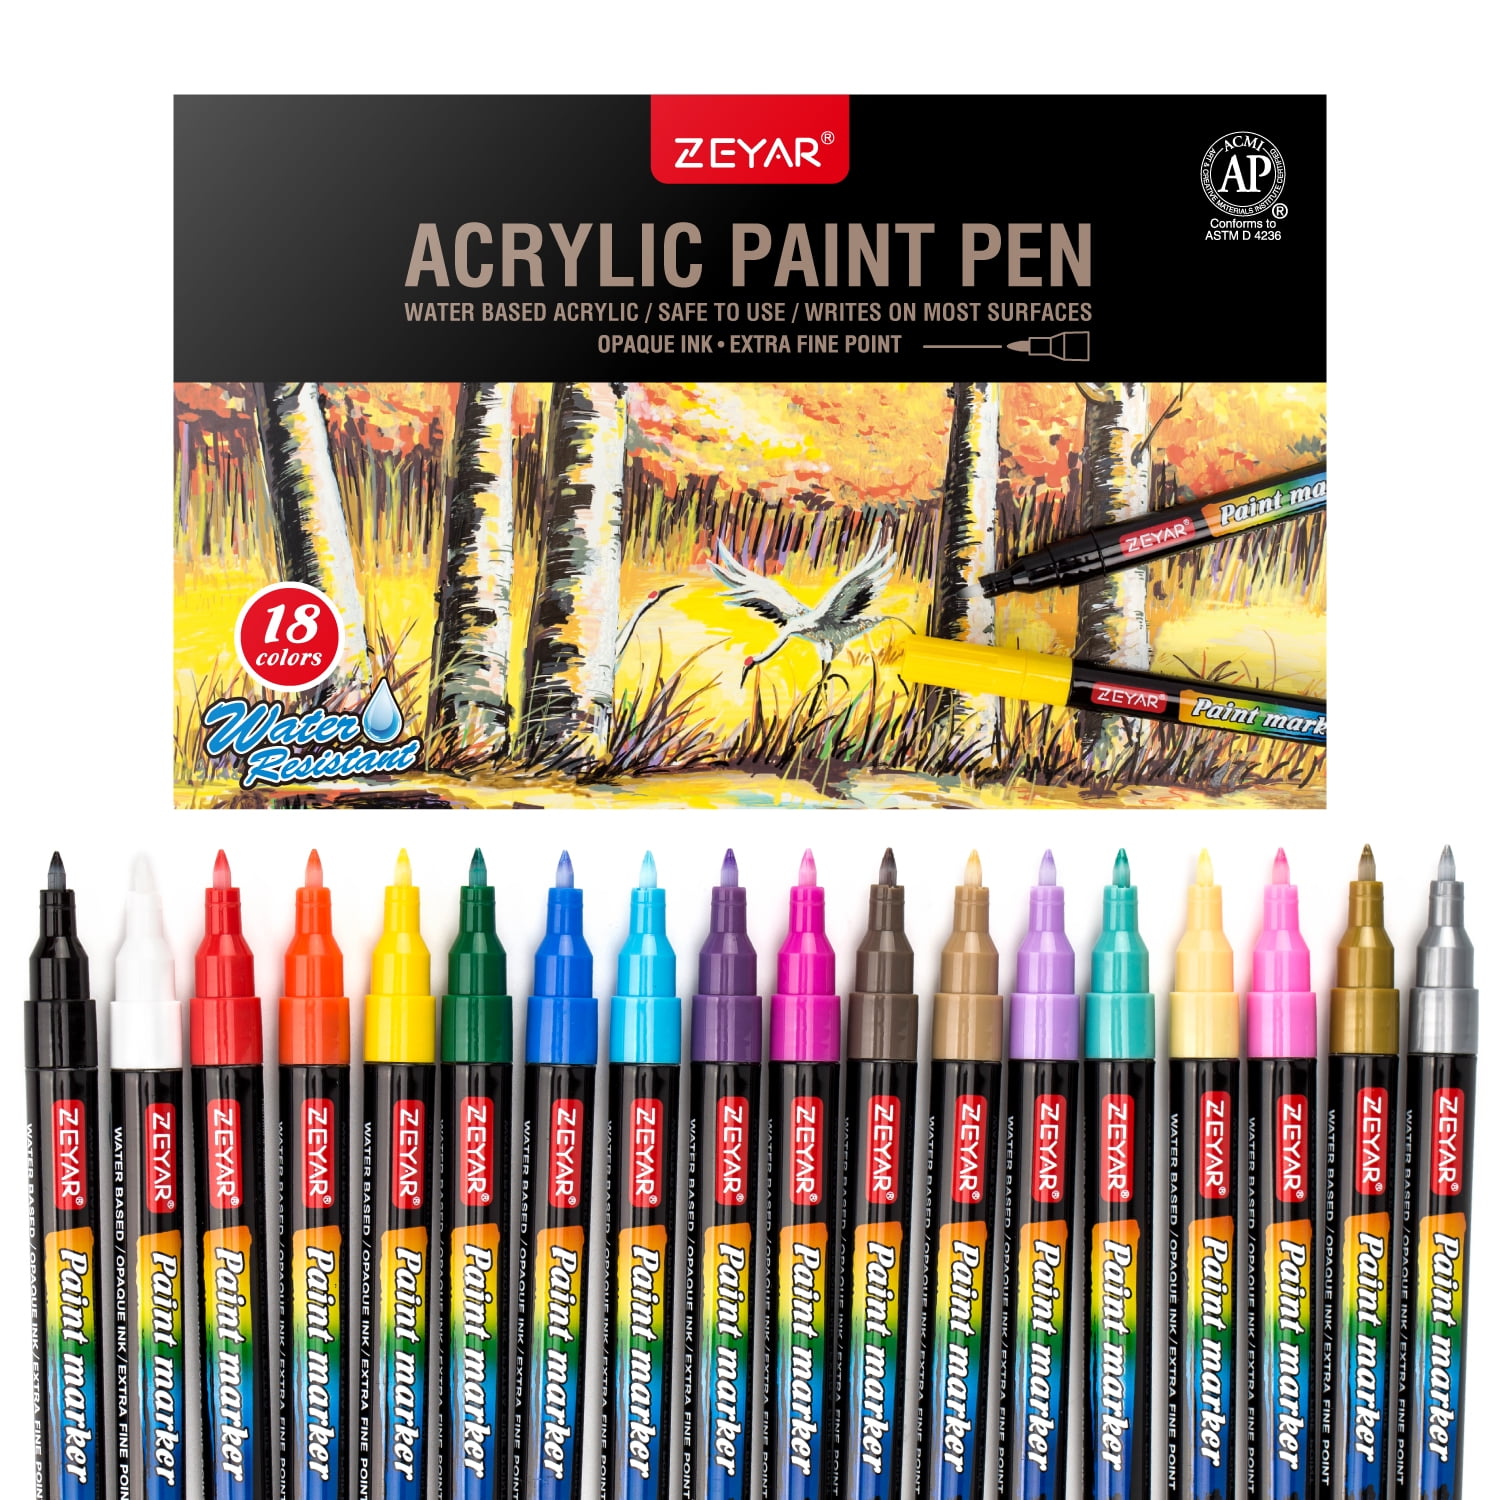 ZEYAR Dual Tip Acrylic Paint Pens 24 Colors, Board and Extra Fine Tips,  Patented Product, AP Certified, Waterproof Ink, Works on Rock, Wood, Glass,  Metal, Ceramic and More (24 Colors) 